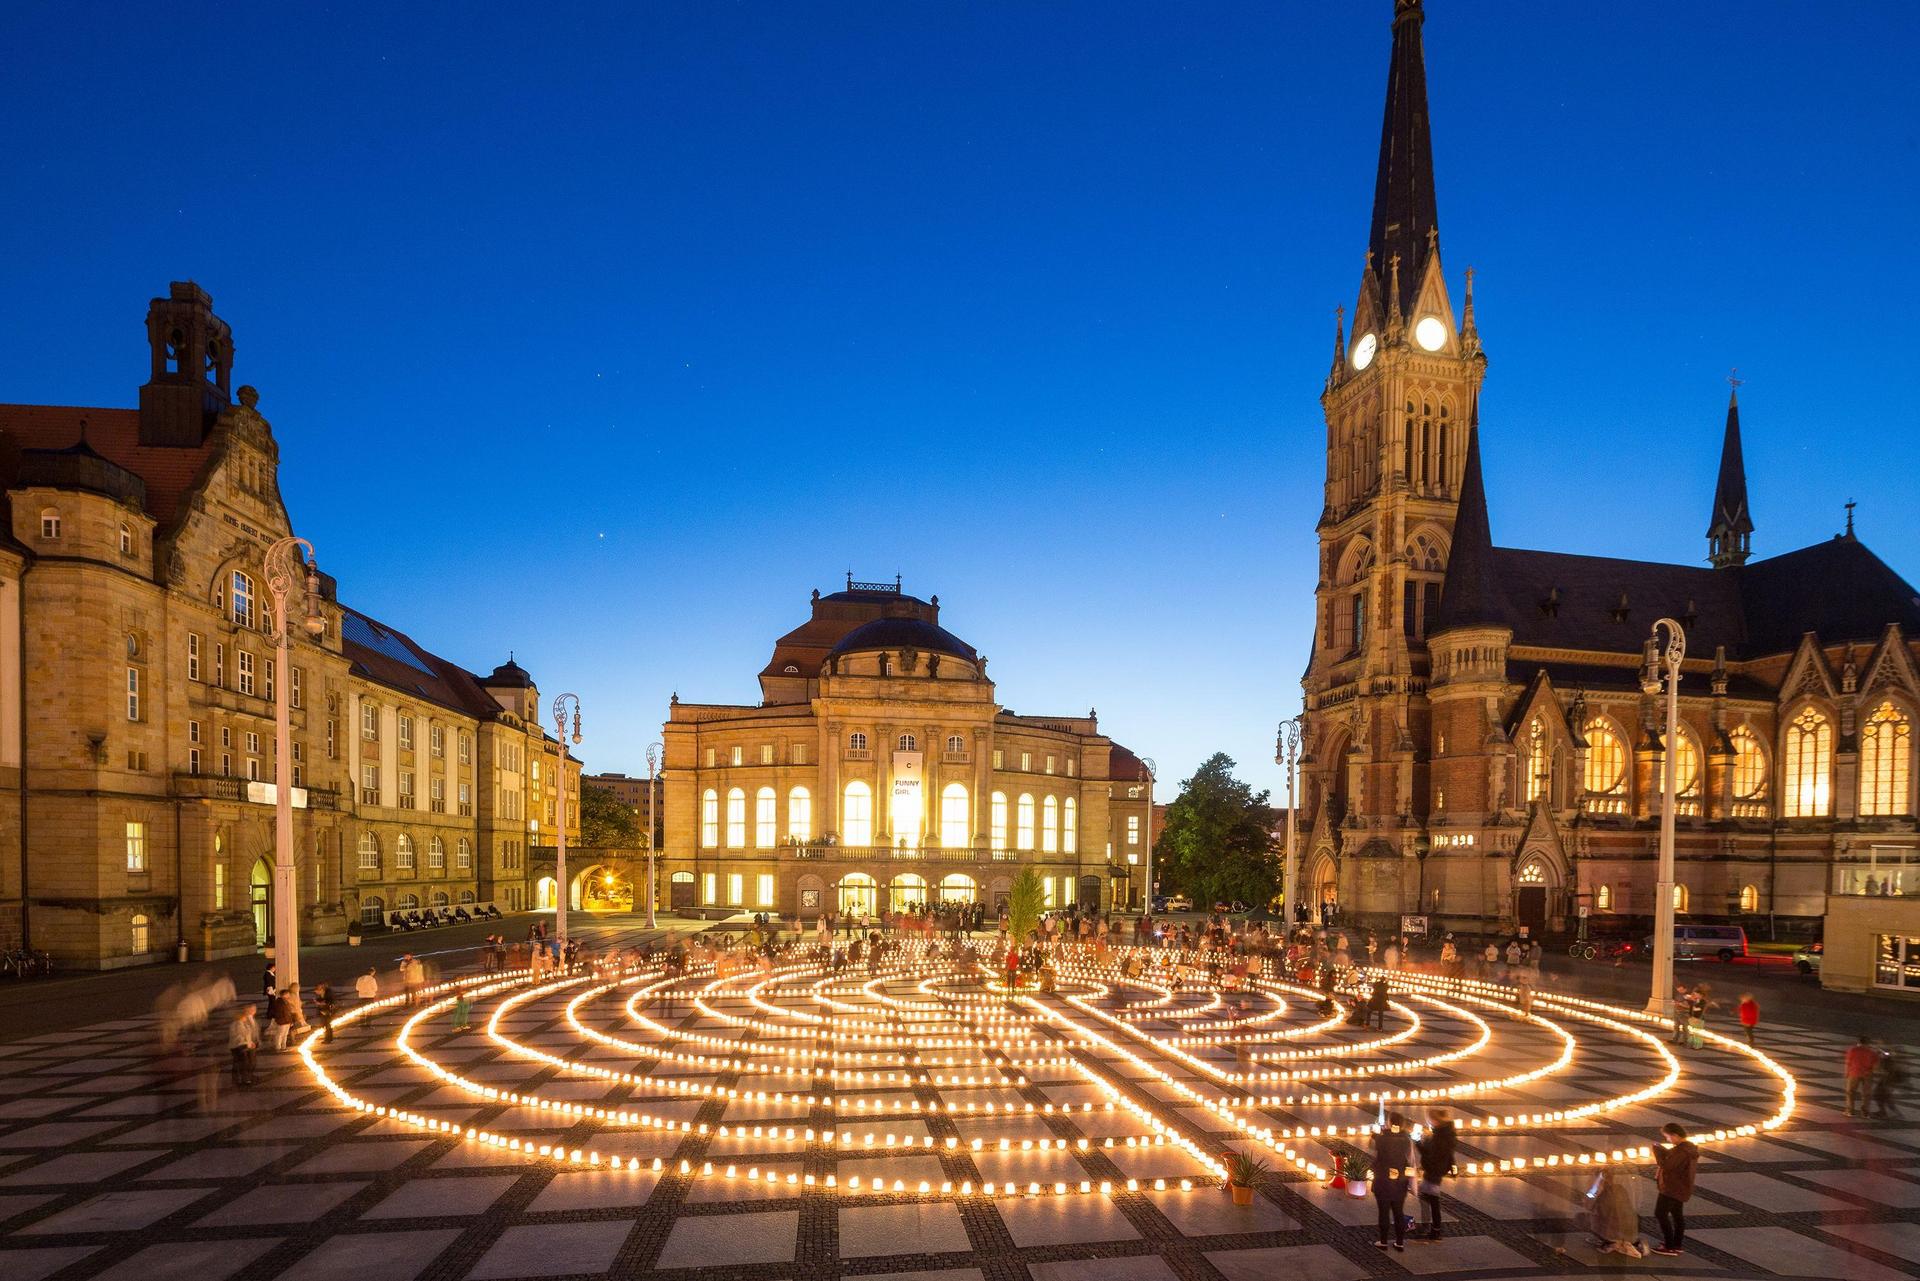 Theater square in Chemnitz with lights labyrinth